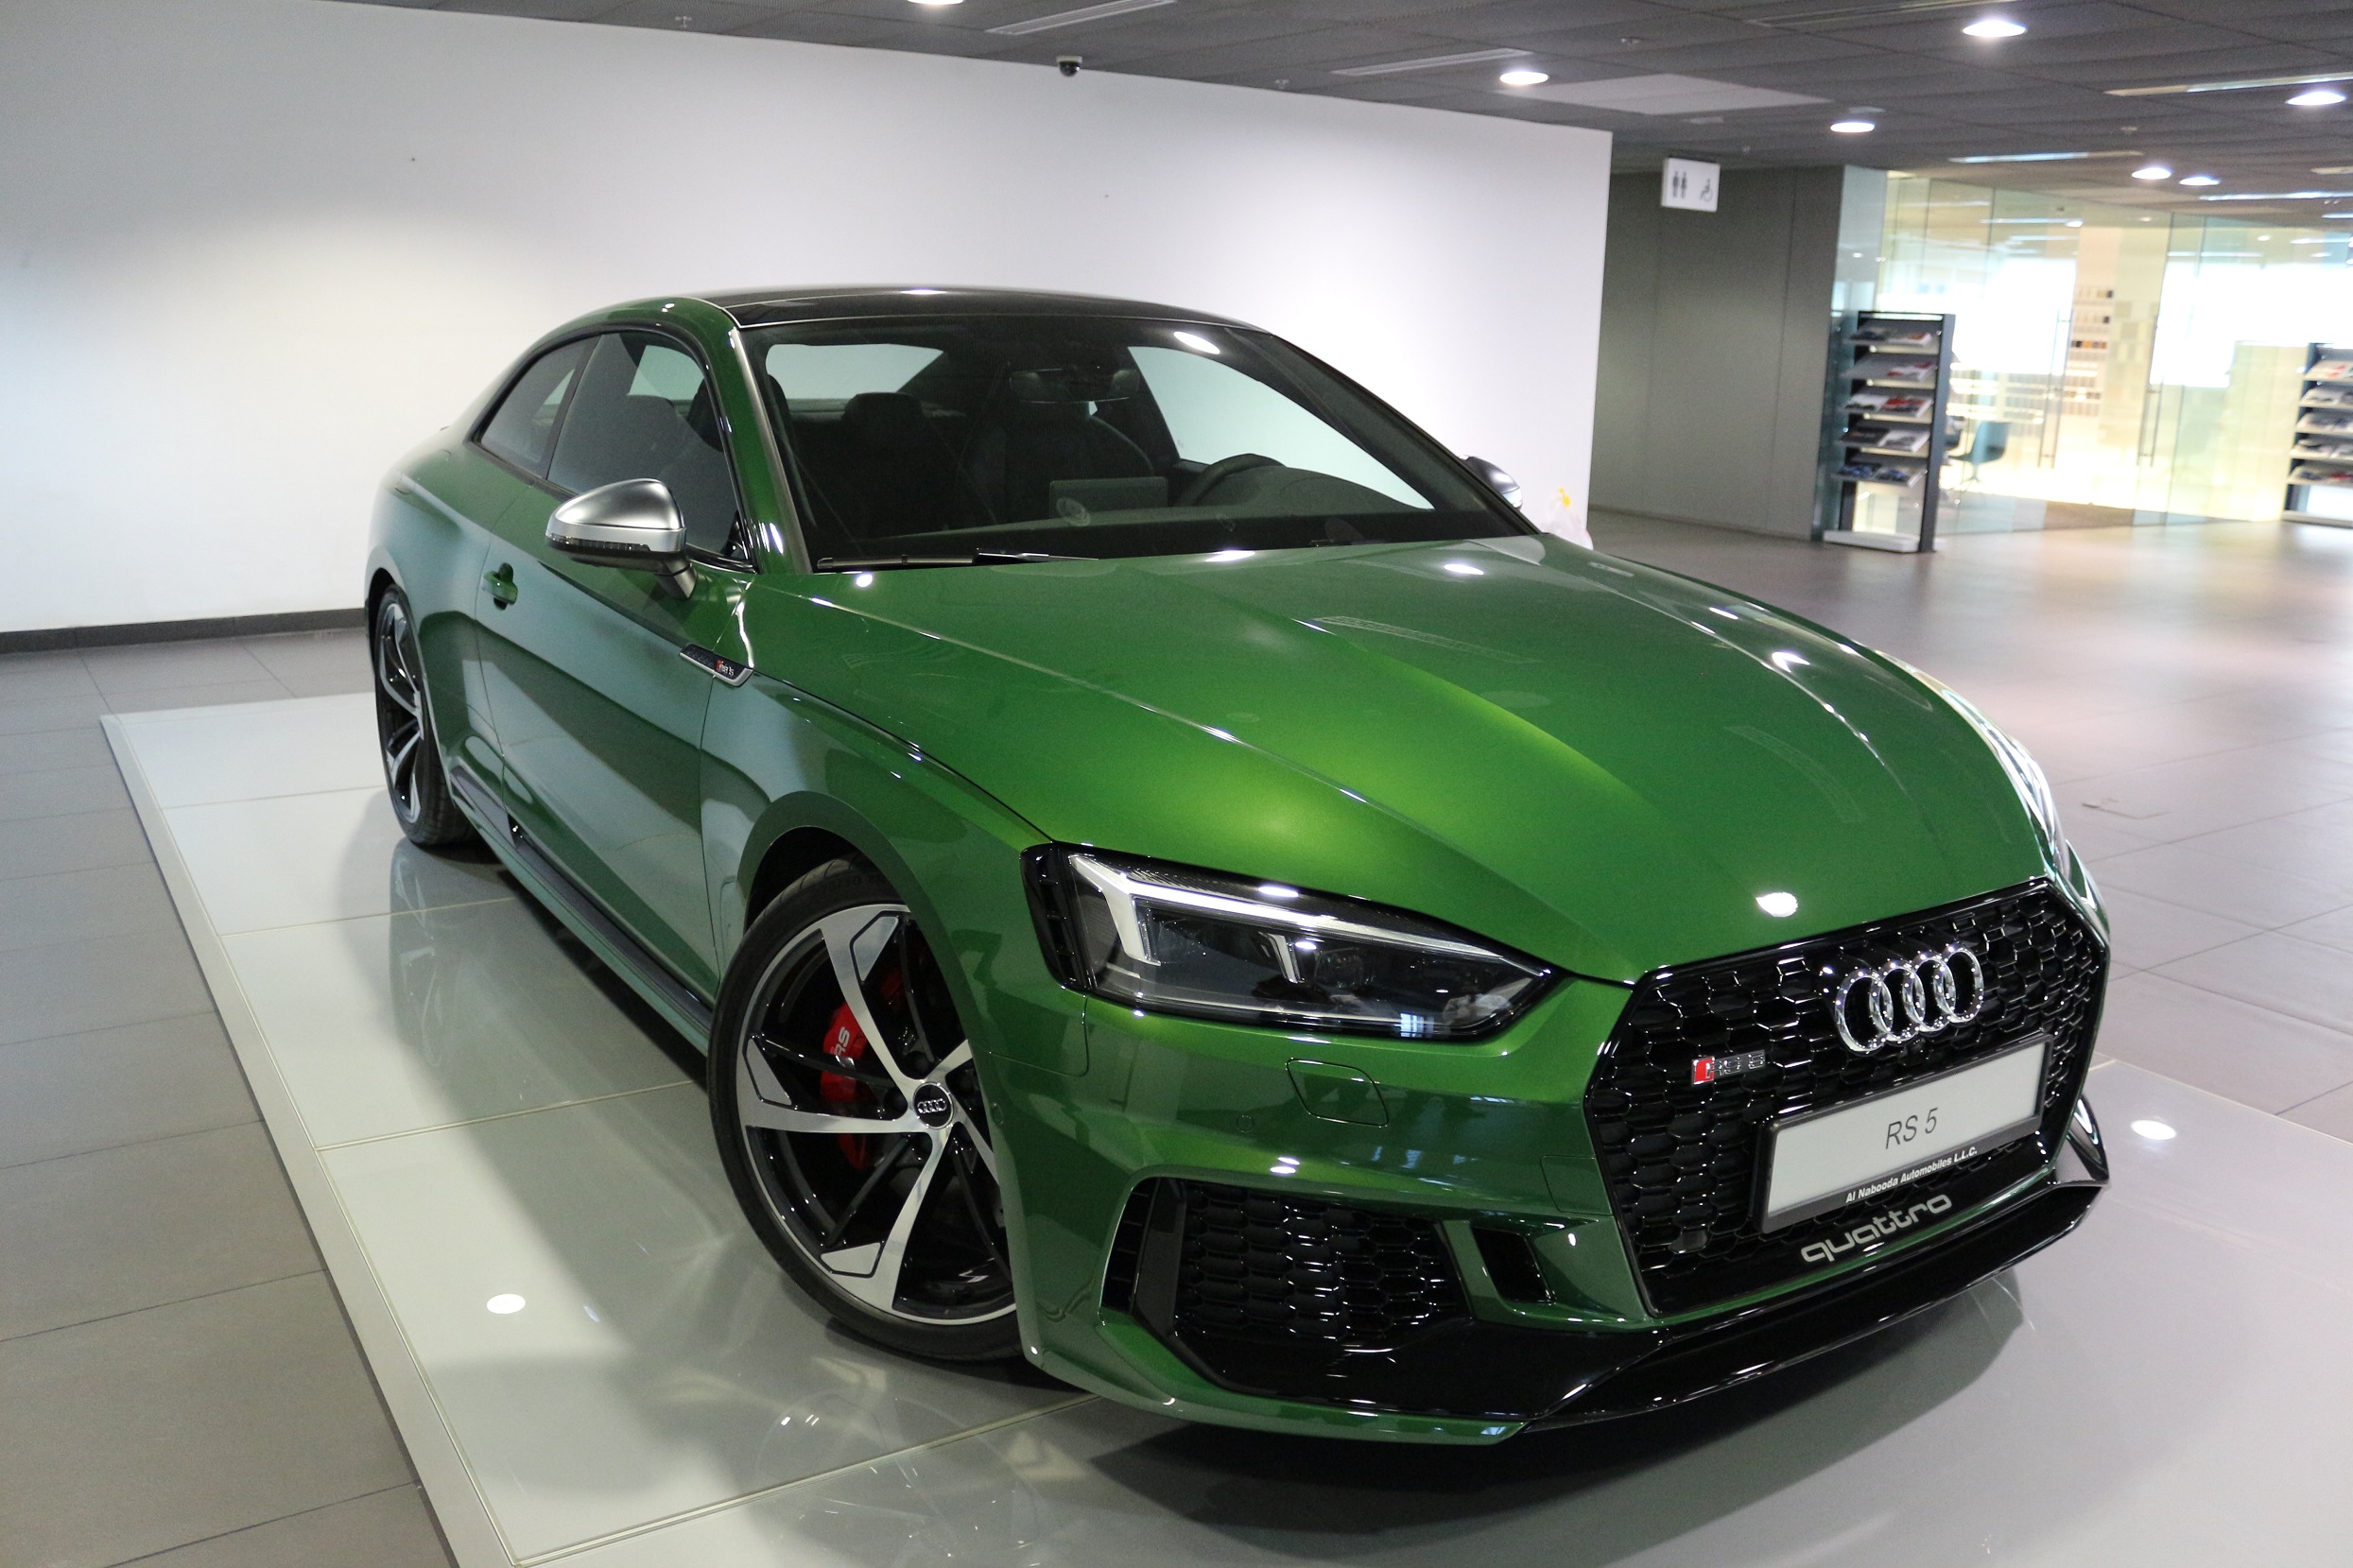 The New Audi RS 5 Coupé Launched in Dubai